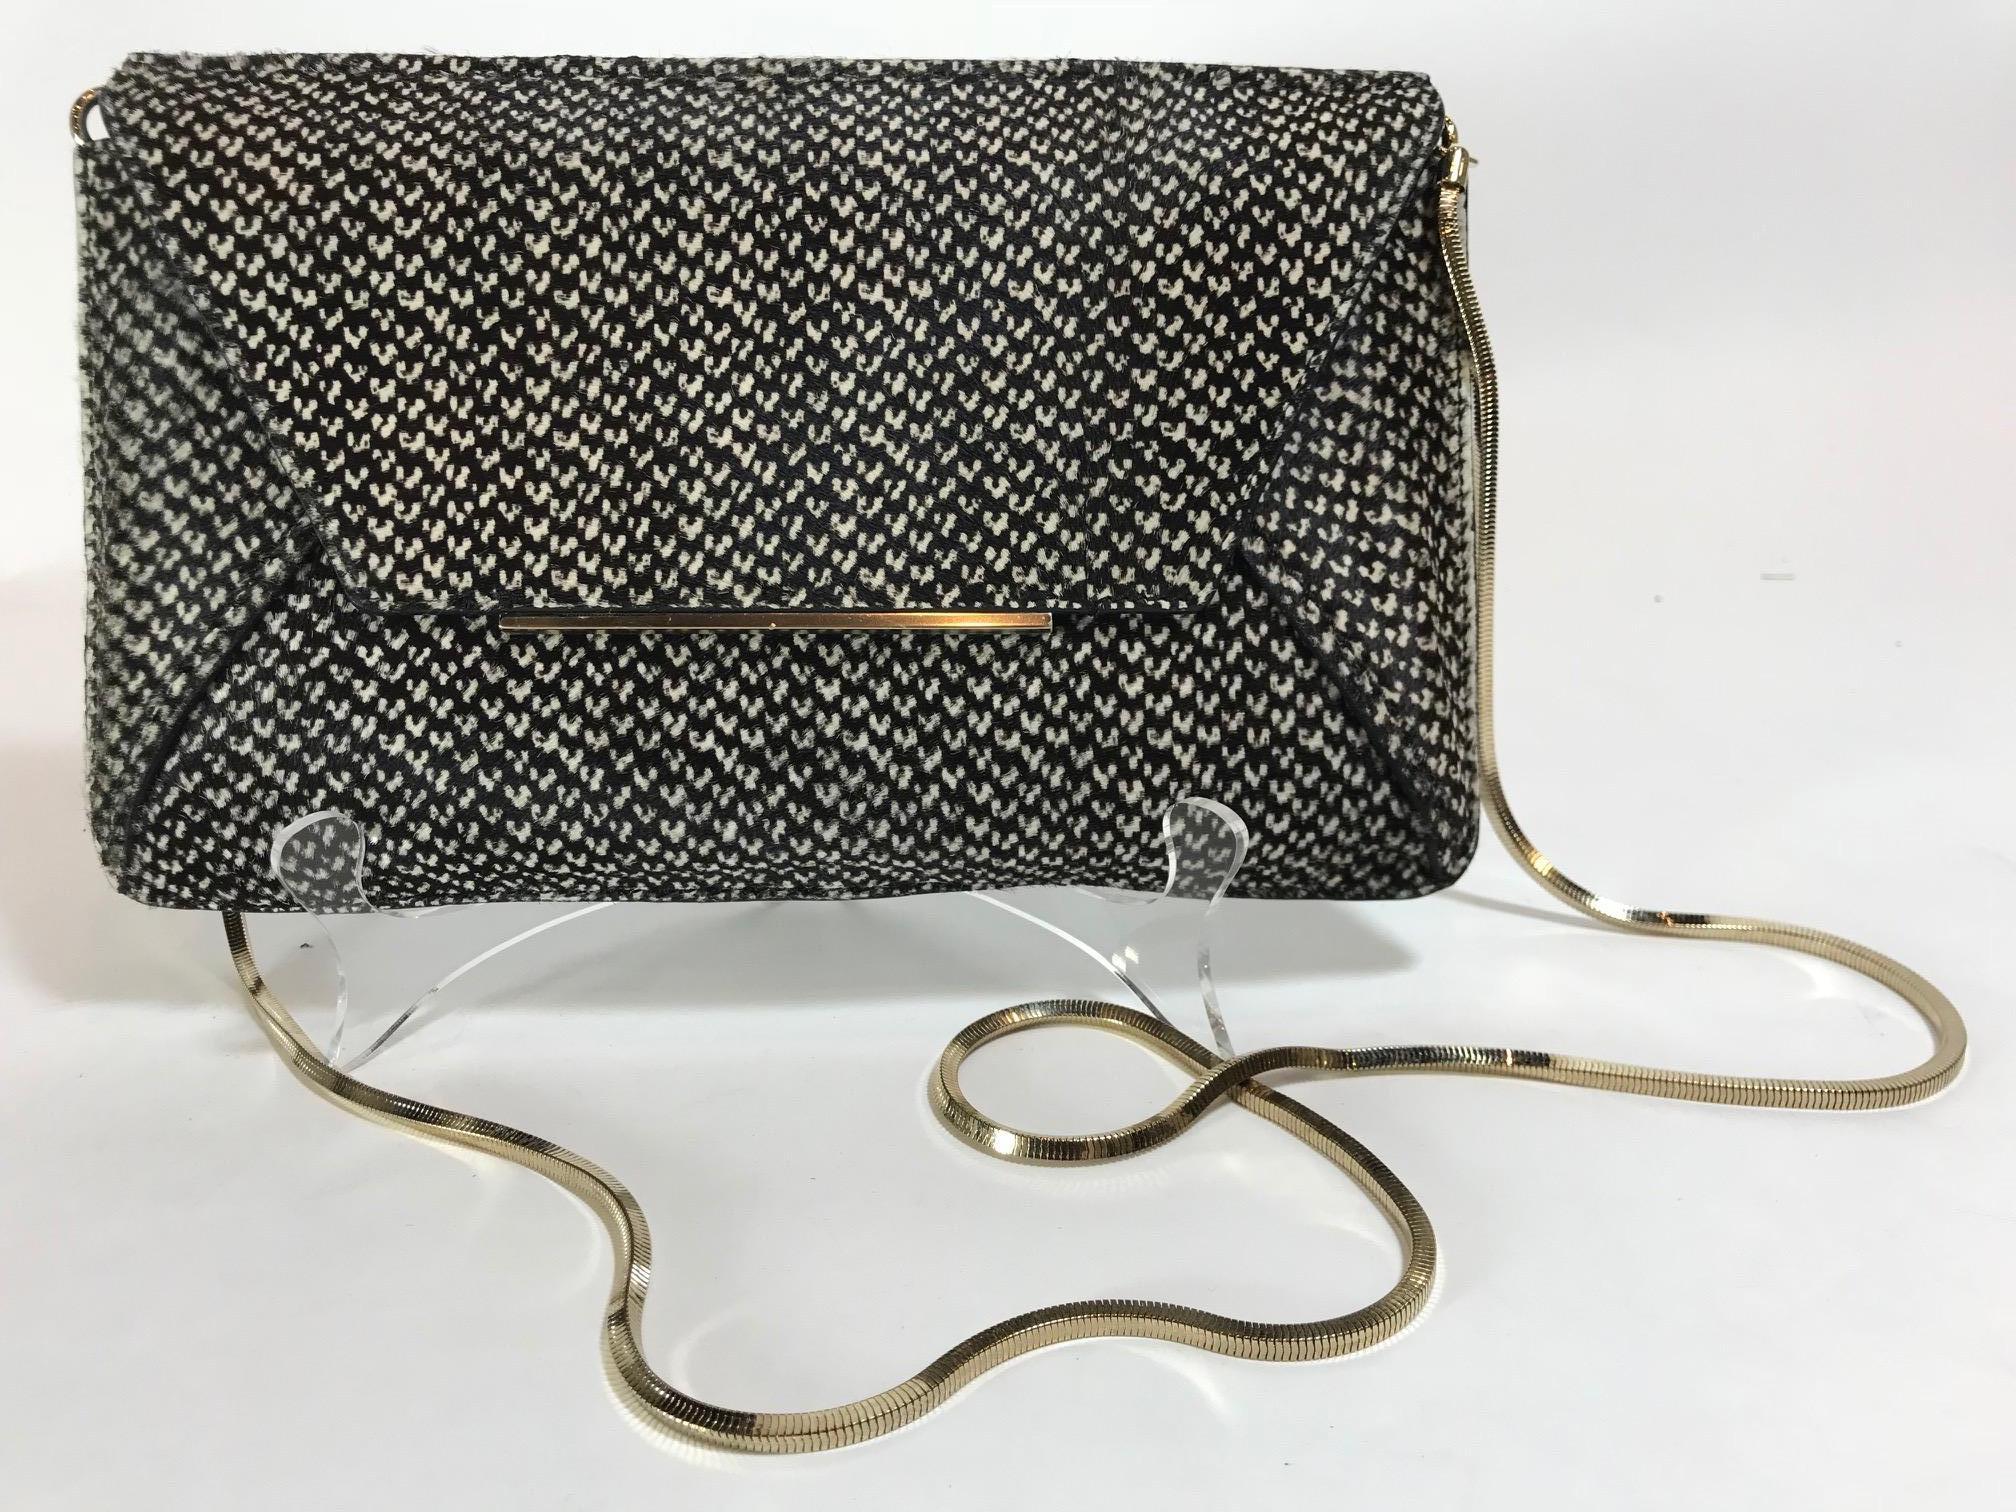 Brown and creme printed ponyhair Lanvin envelope clutch with gold-tone hardware, optional chain-link shoulder strap, bar adornment at front flap, tawny jacquard woven lining, single slip pocket at interior wall and snap closure at front flap.